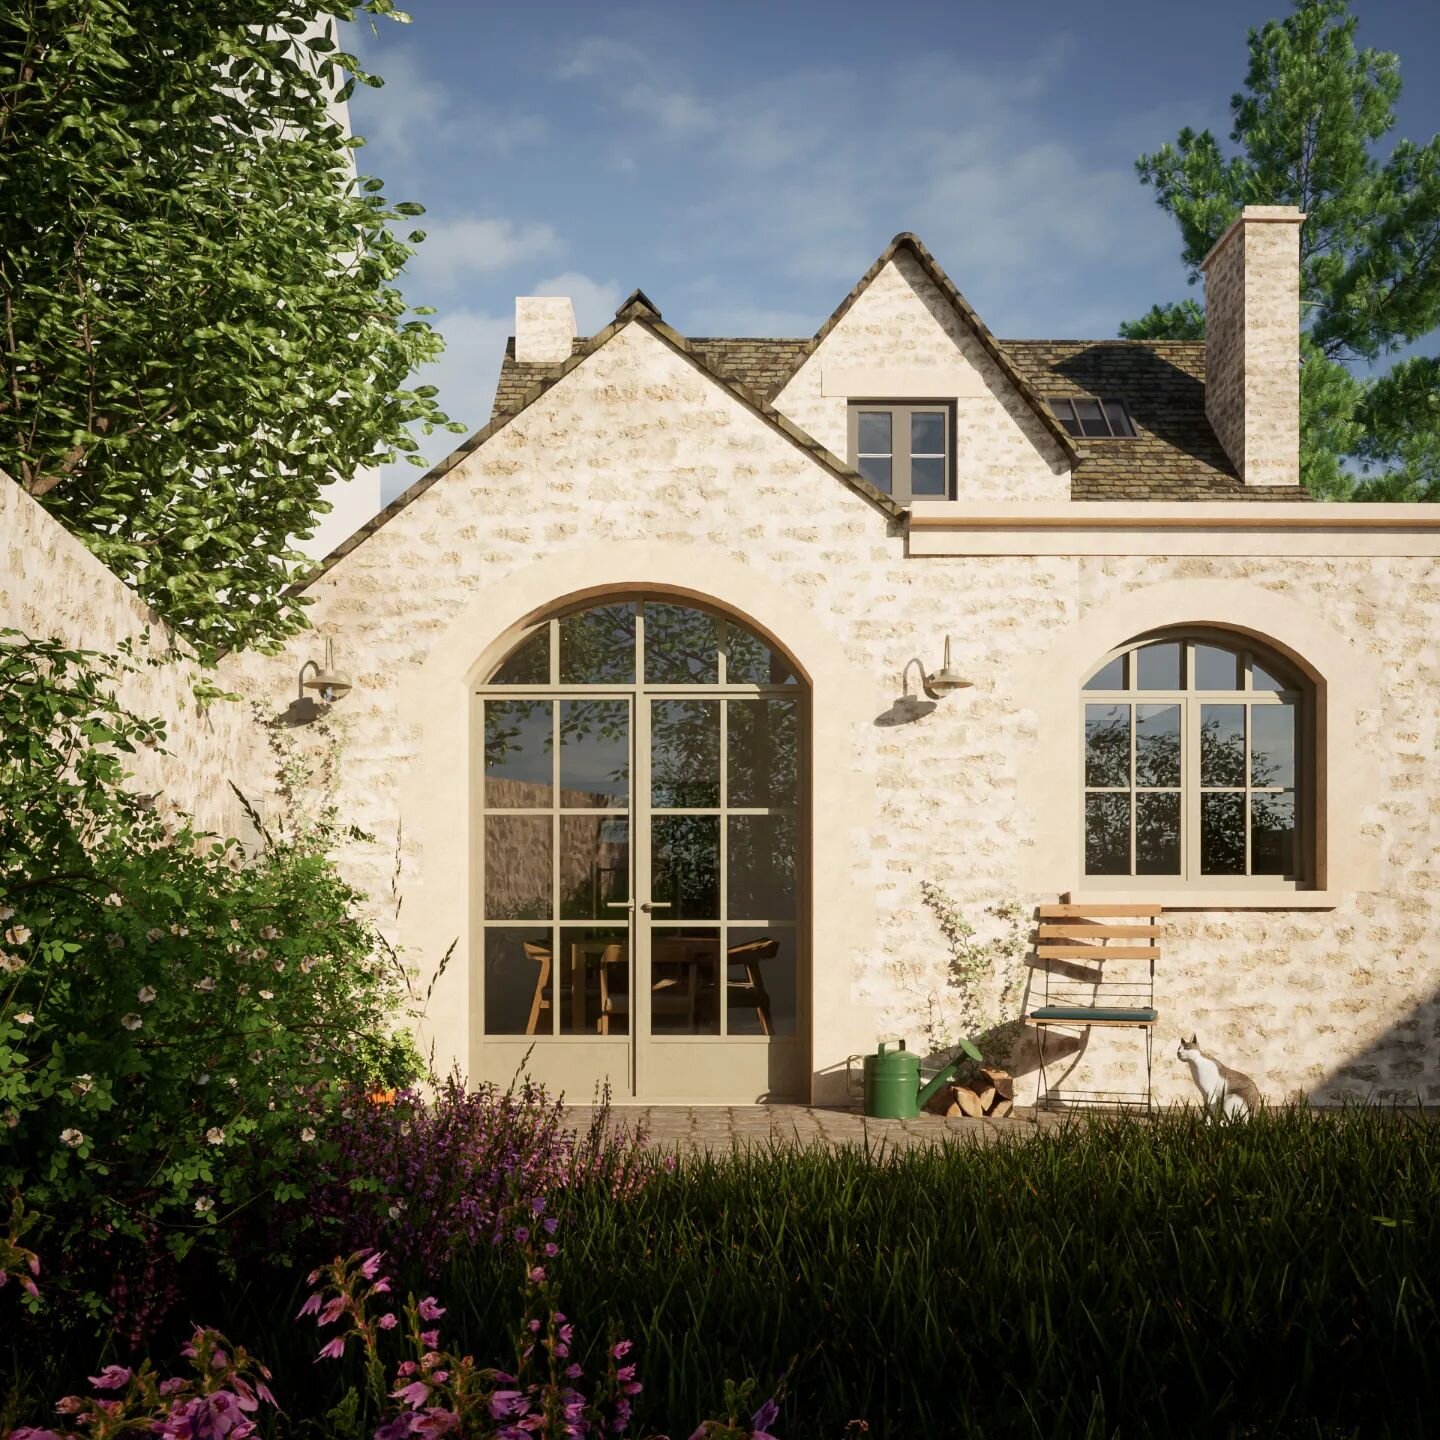 We recently completed technical drawings and gained planning and building control approval for this rear extension and loft conversion to a Cotswold stone property in Fairford. Looking forward to seeing progress on site soon.